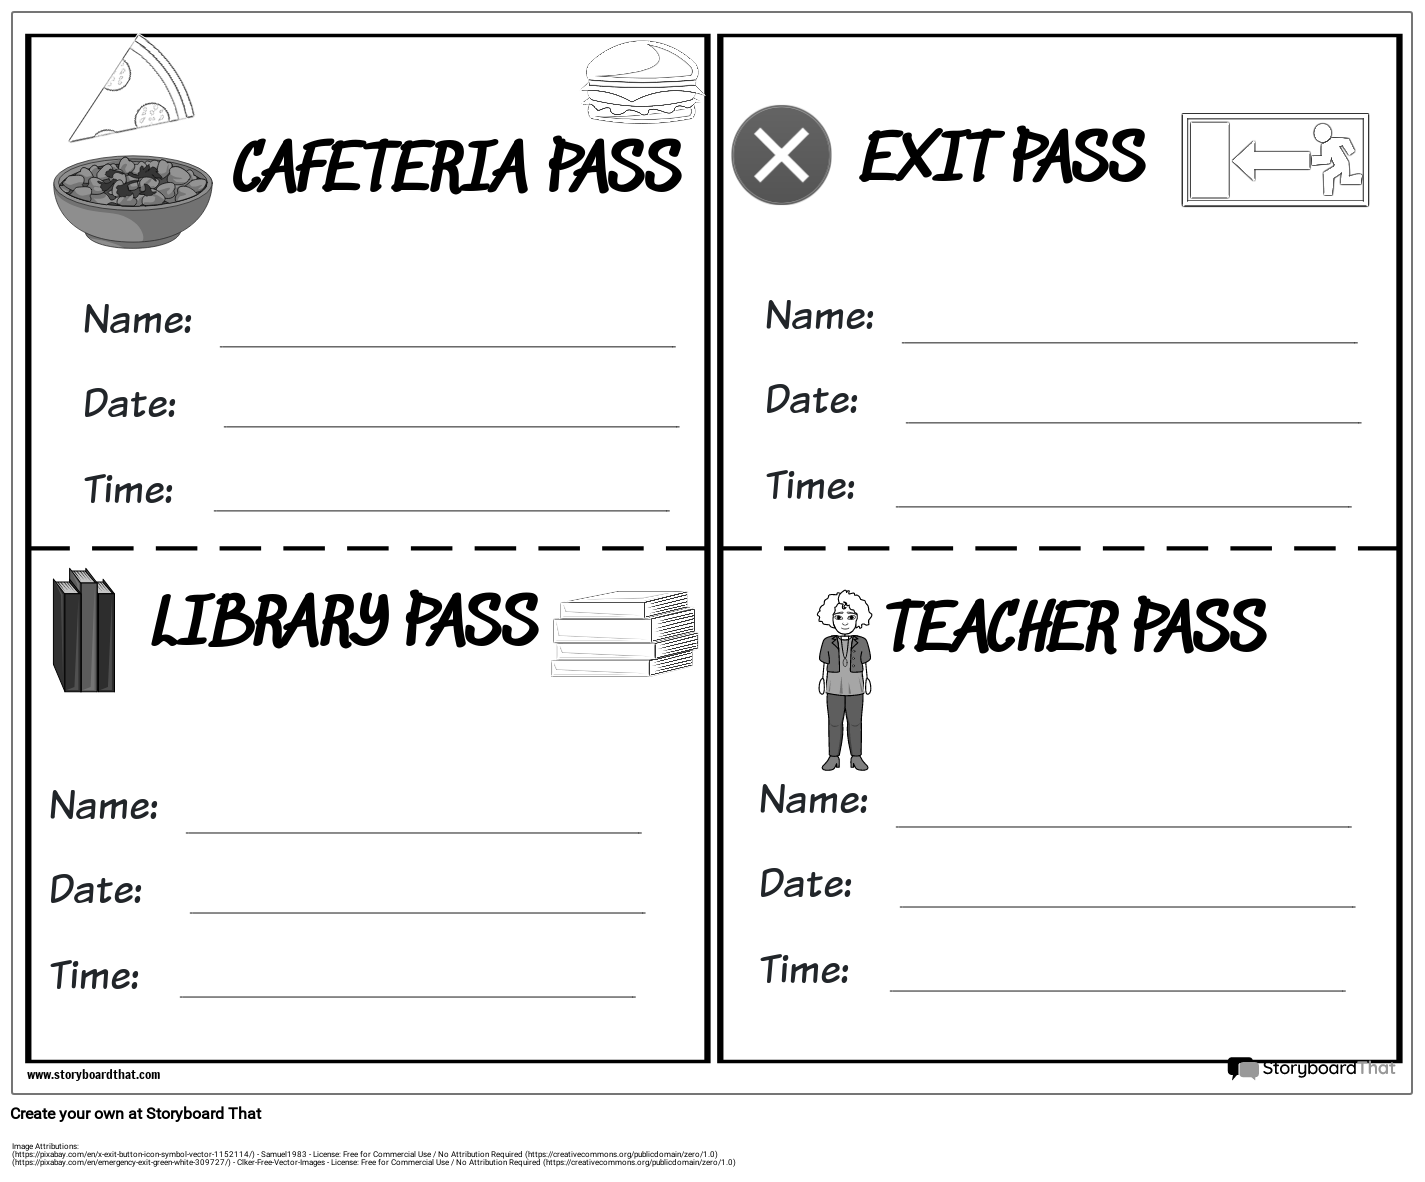 Various Hall Passes in Black and White